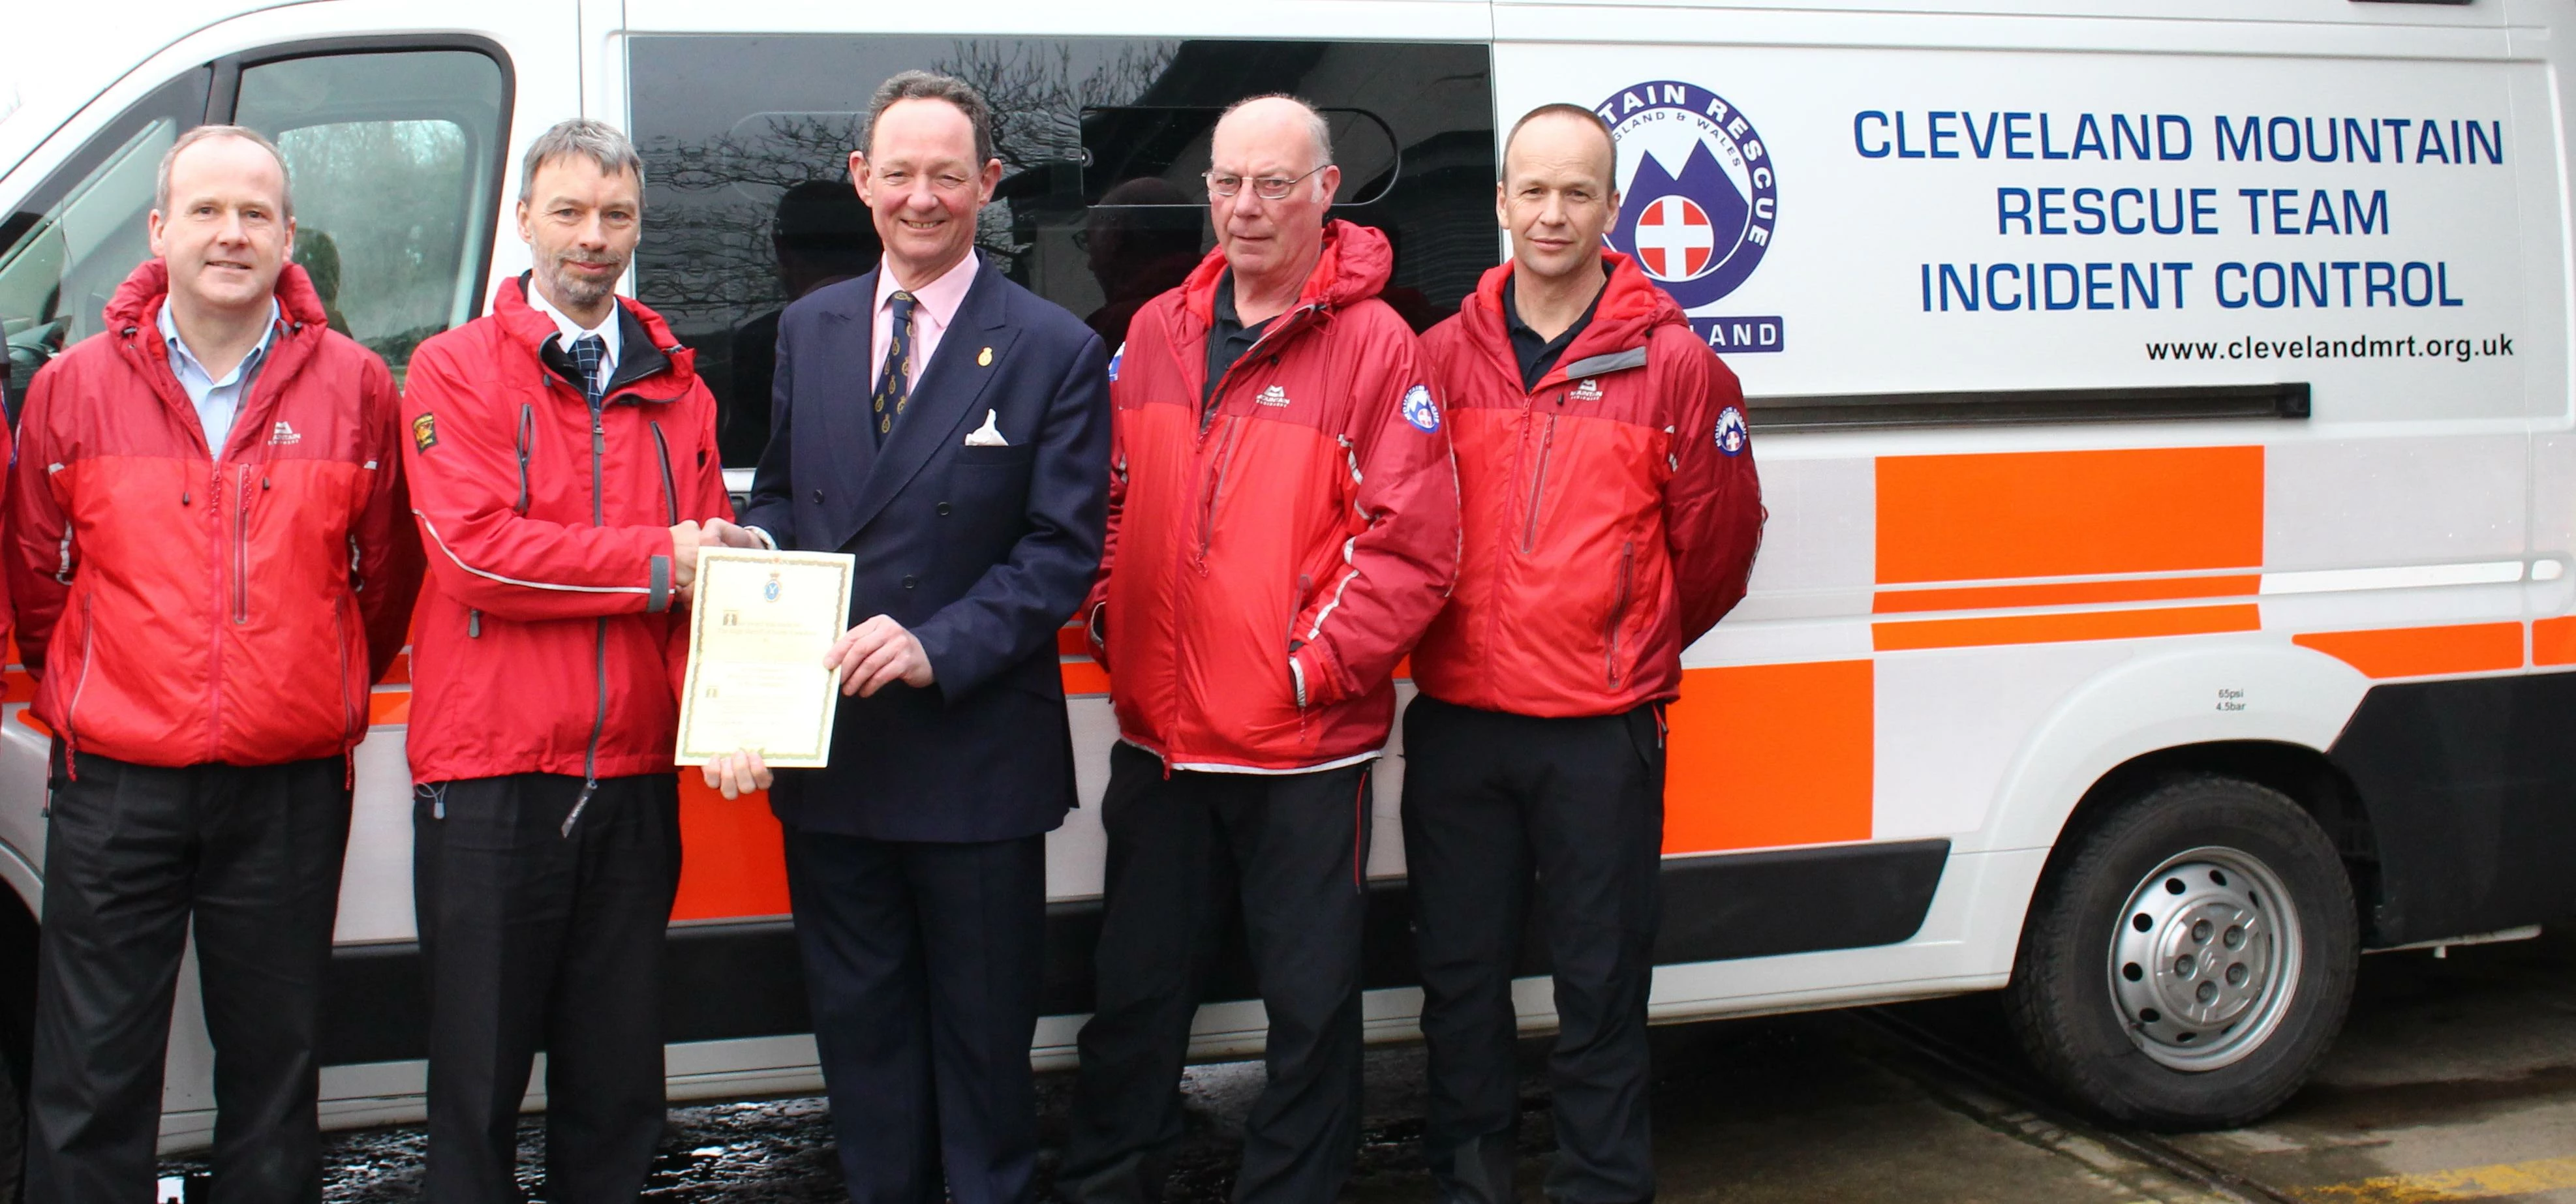 Charlie Forbes Adam, the High Sheriff of North Yorkshire, with members of the Cleveland Mountain Res